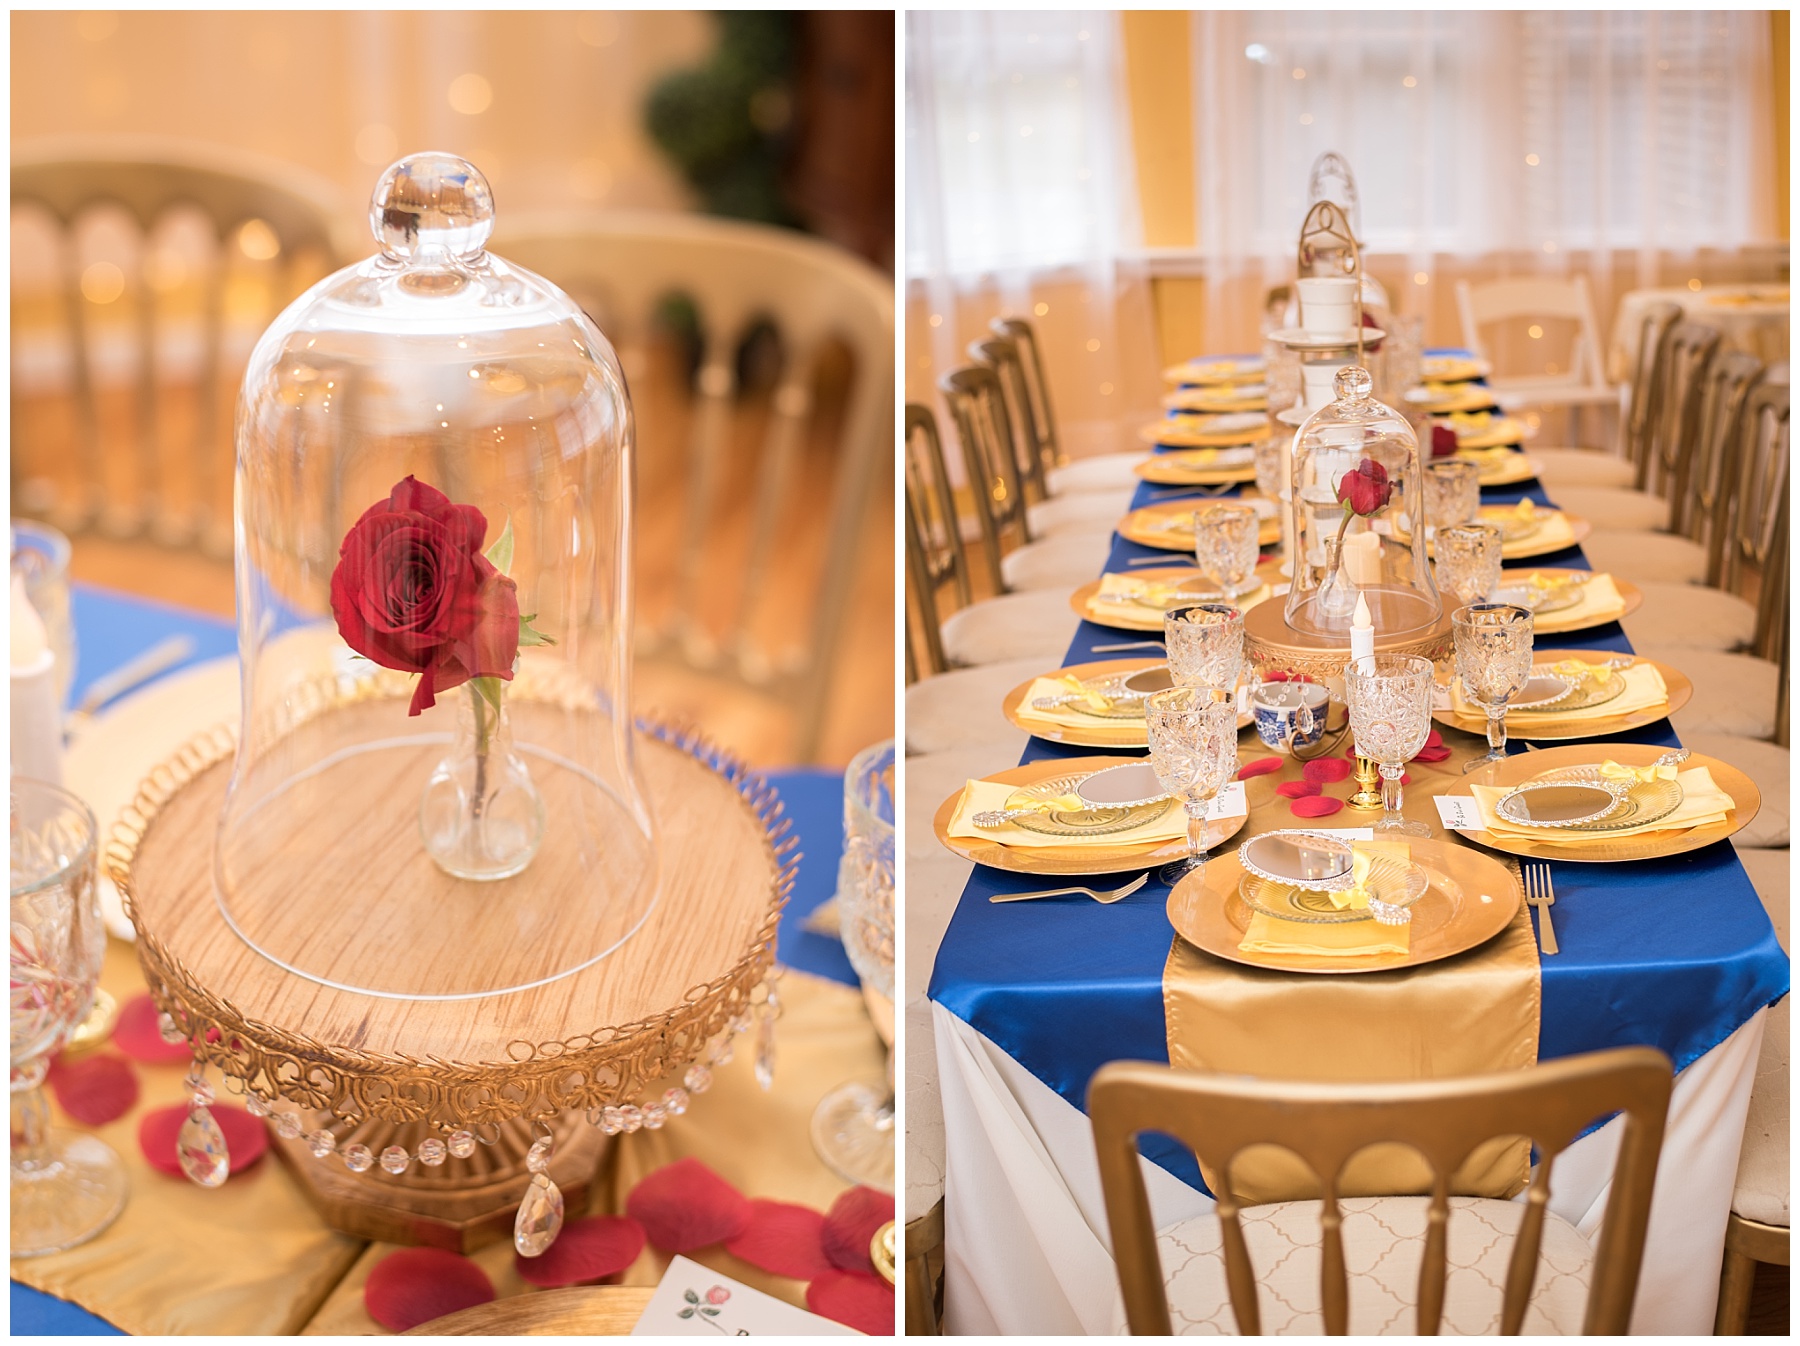 Beauty and the beast birthday party